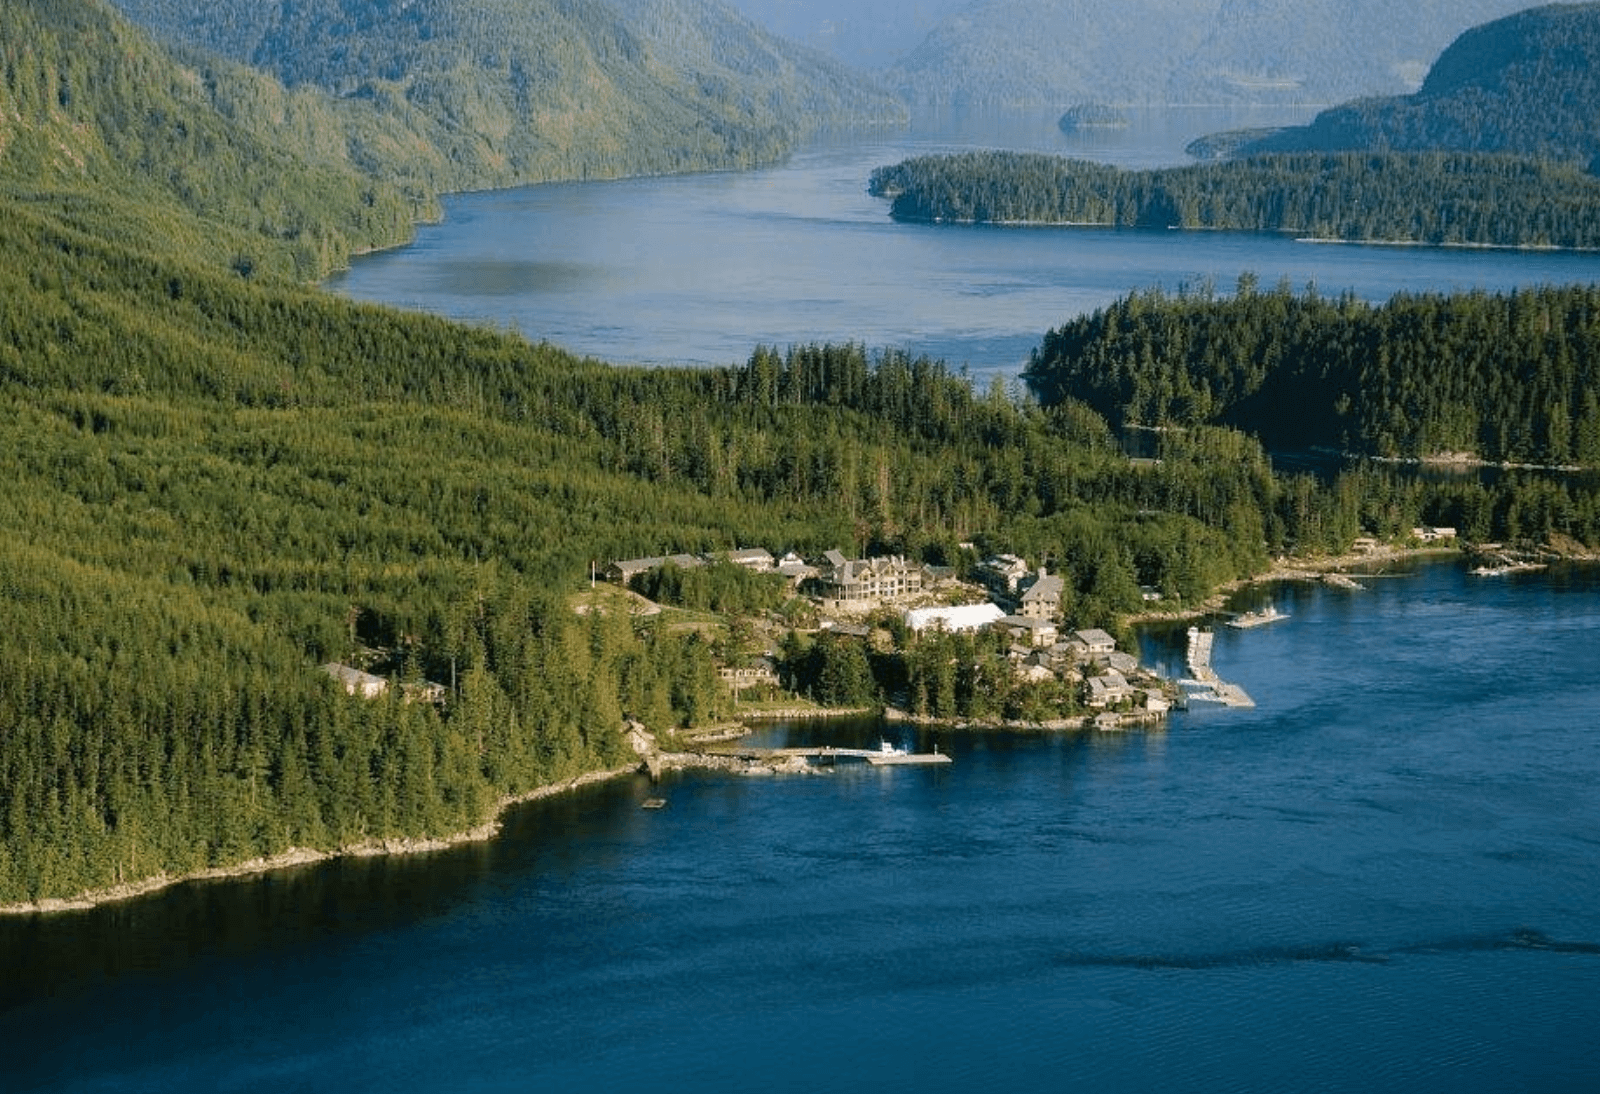 The view over Vancouver island and Sonora Resort